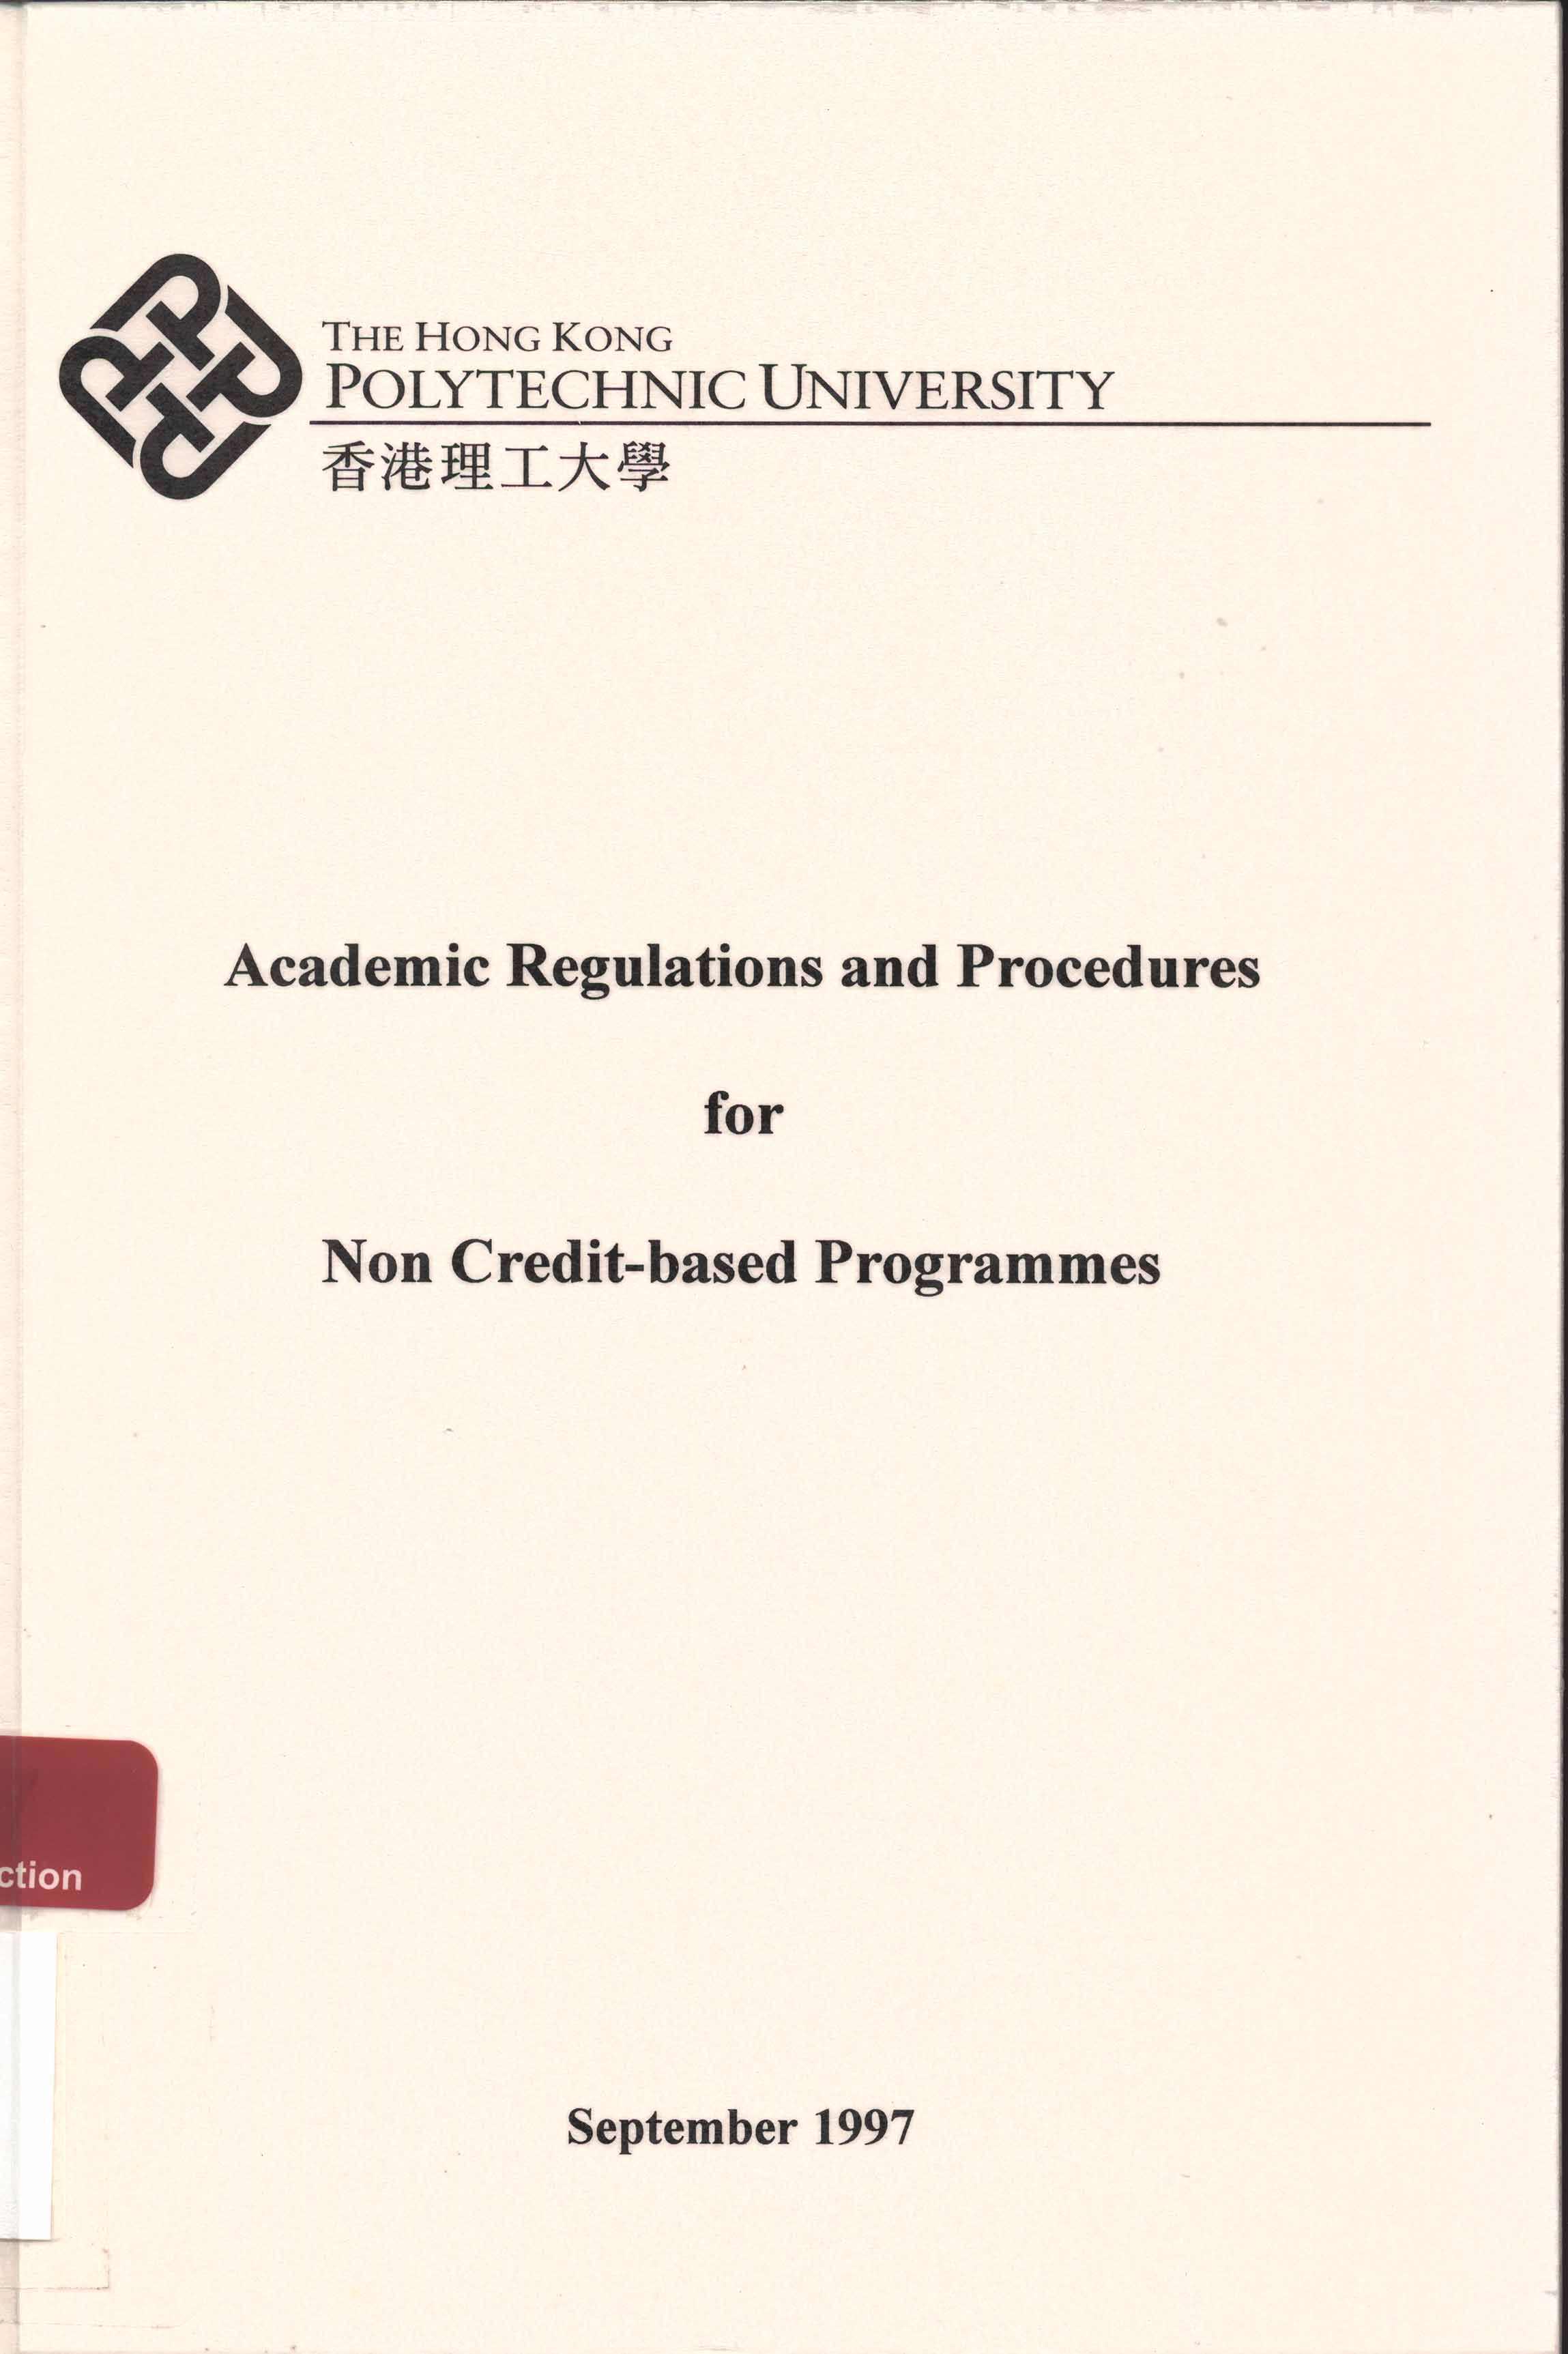 Academic regulations and procedures for non credit-based programmes 1997